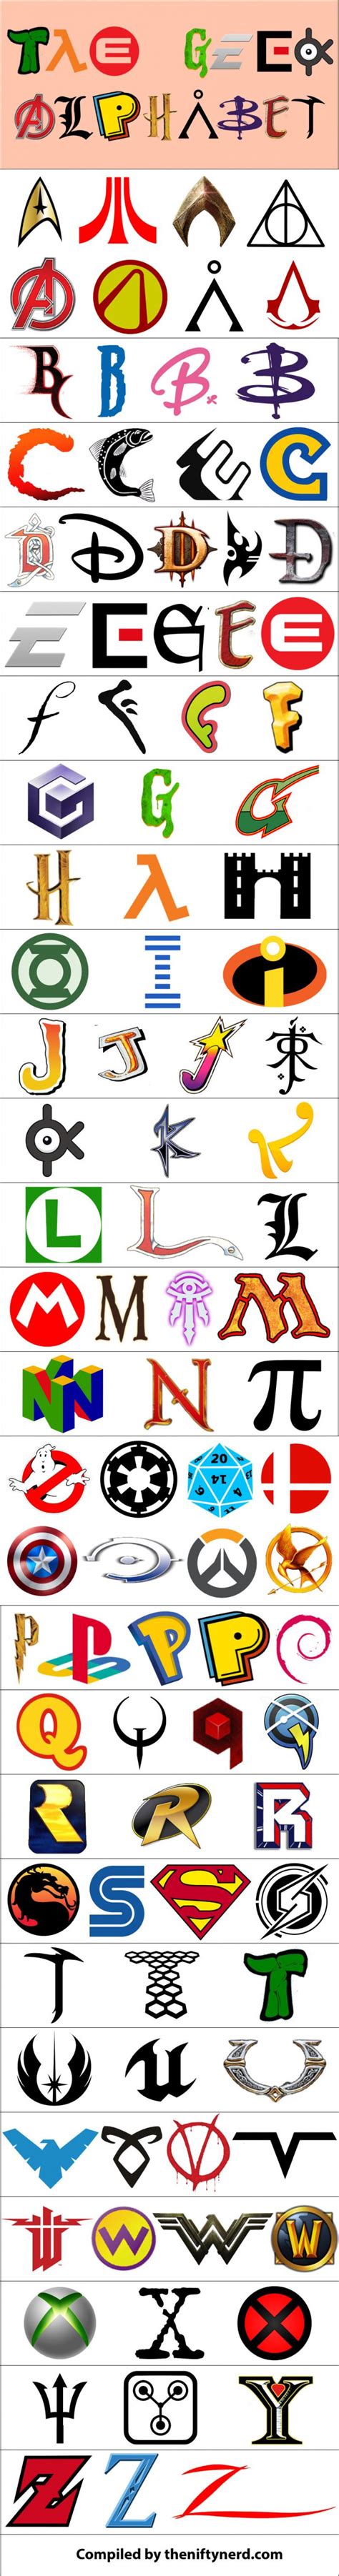 Now You Can Spell Like A Nerd With The Geek Alphabet